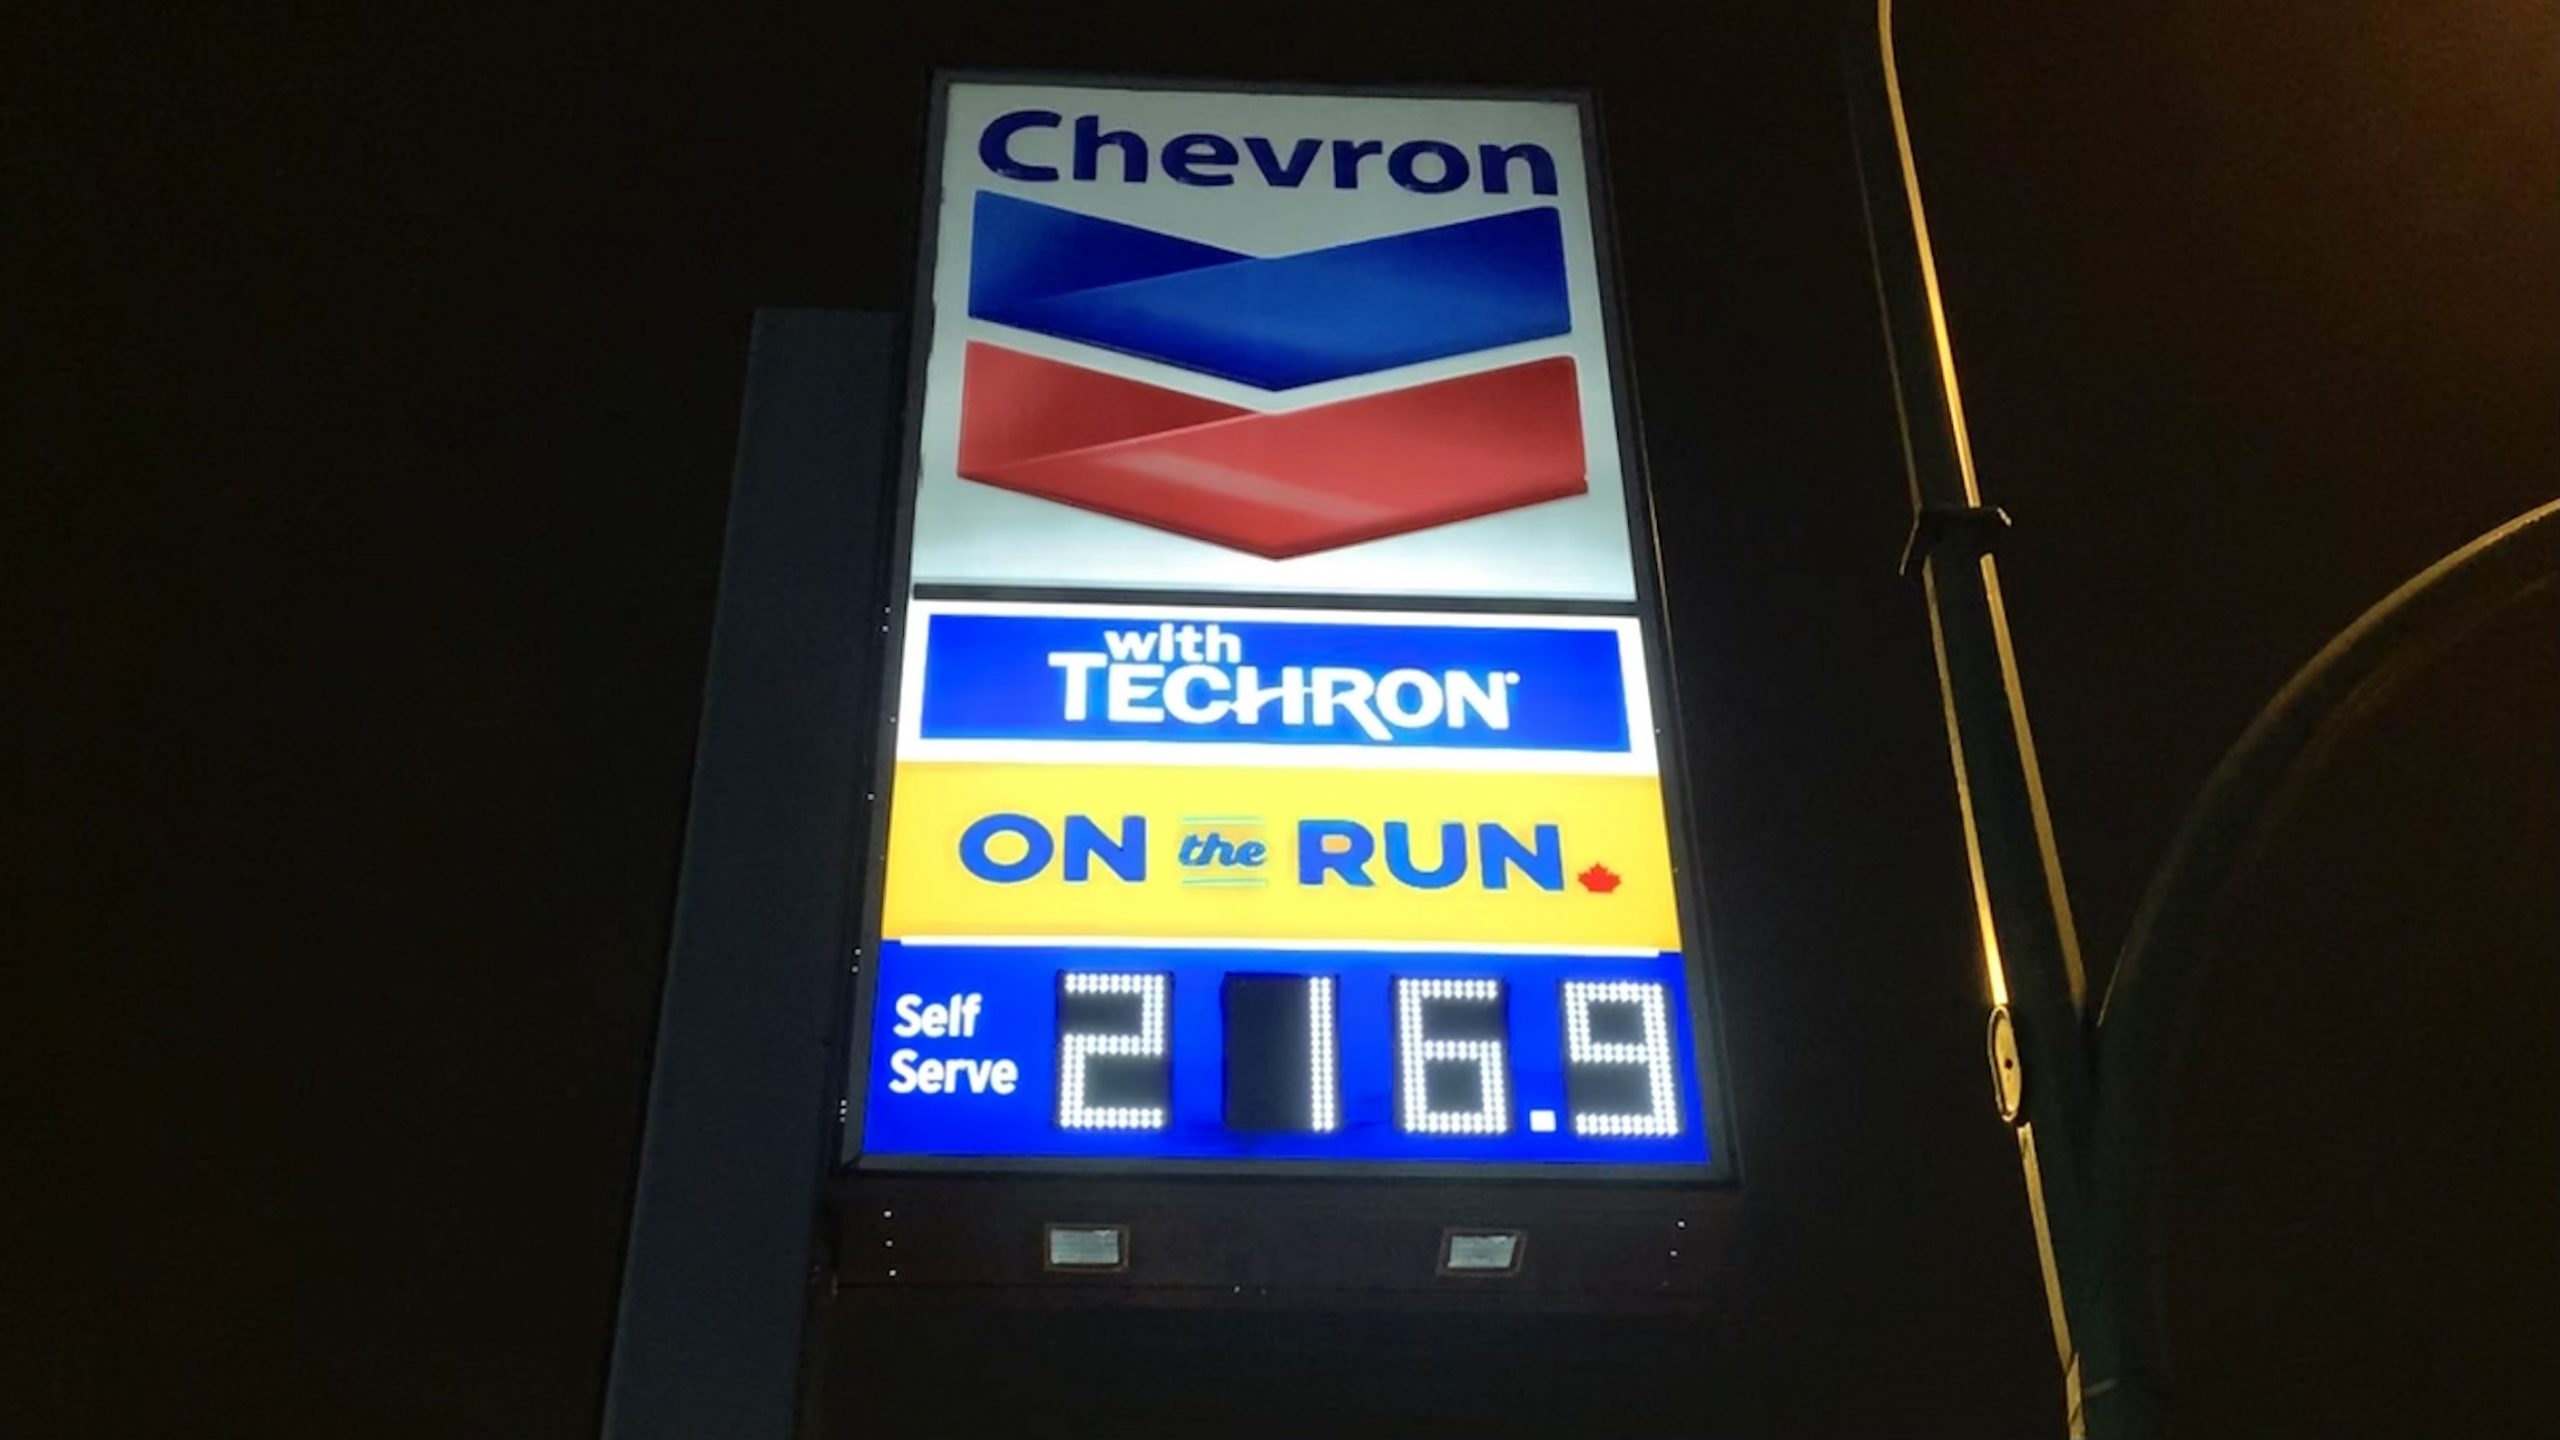 metro-vancouver-gas-prices-hit-all-time-high-citynews-vancouver